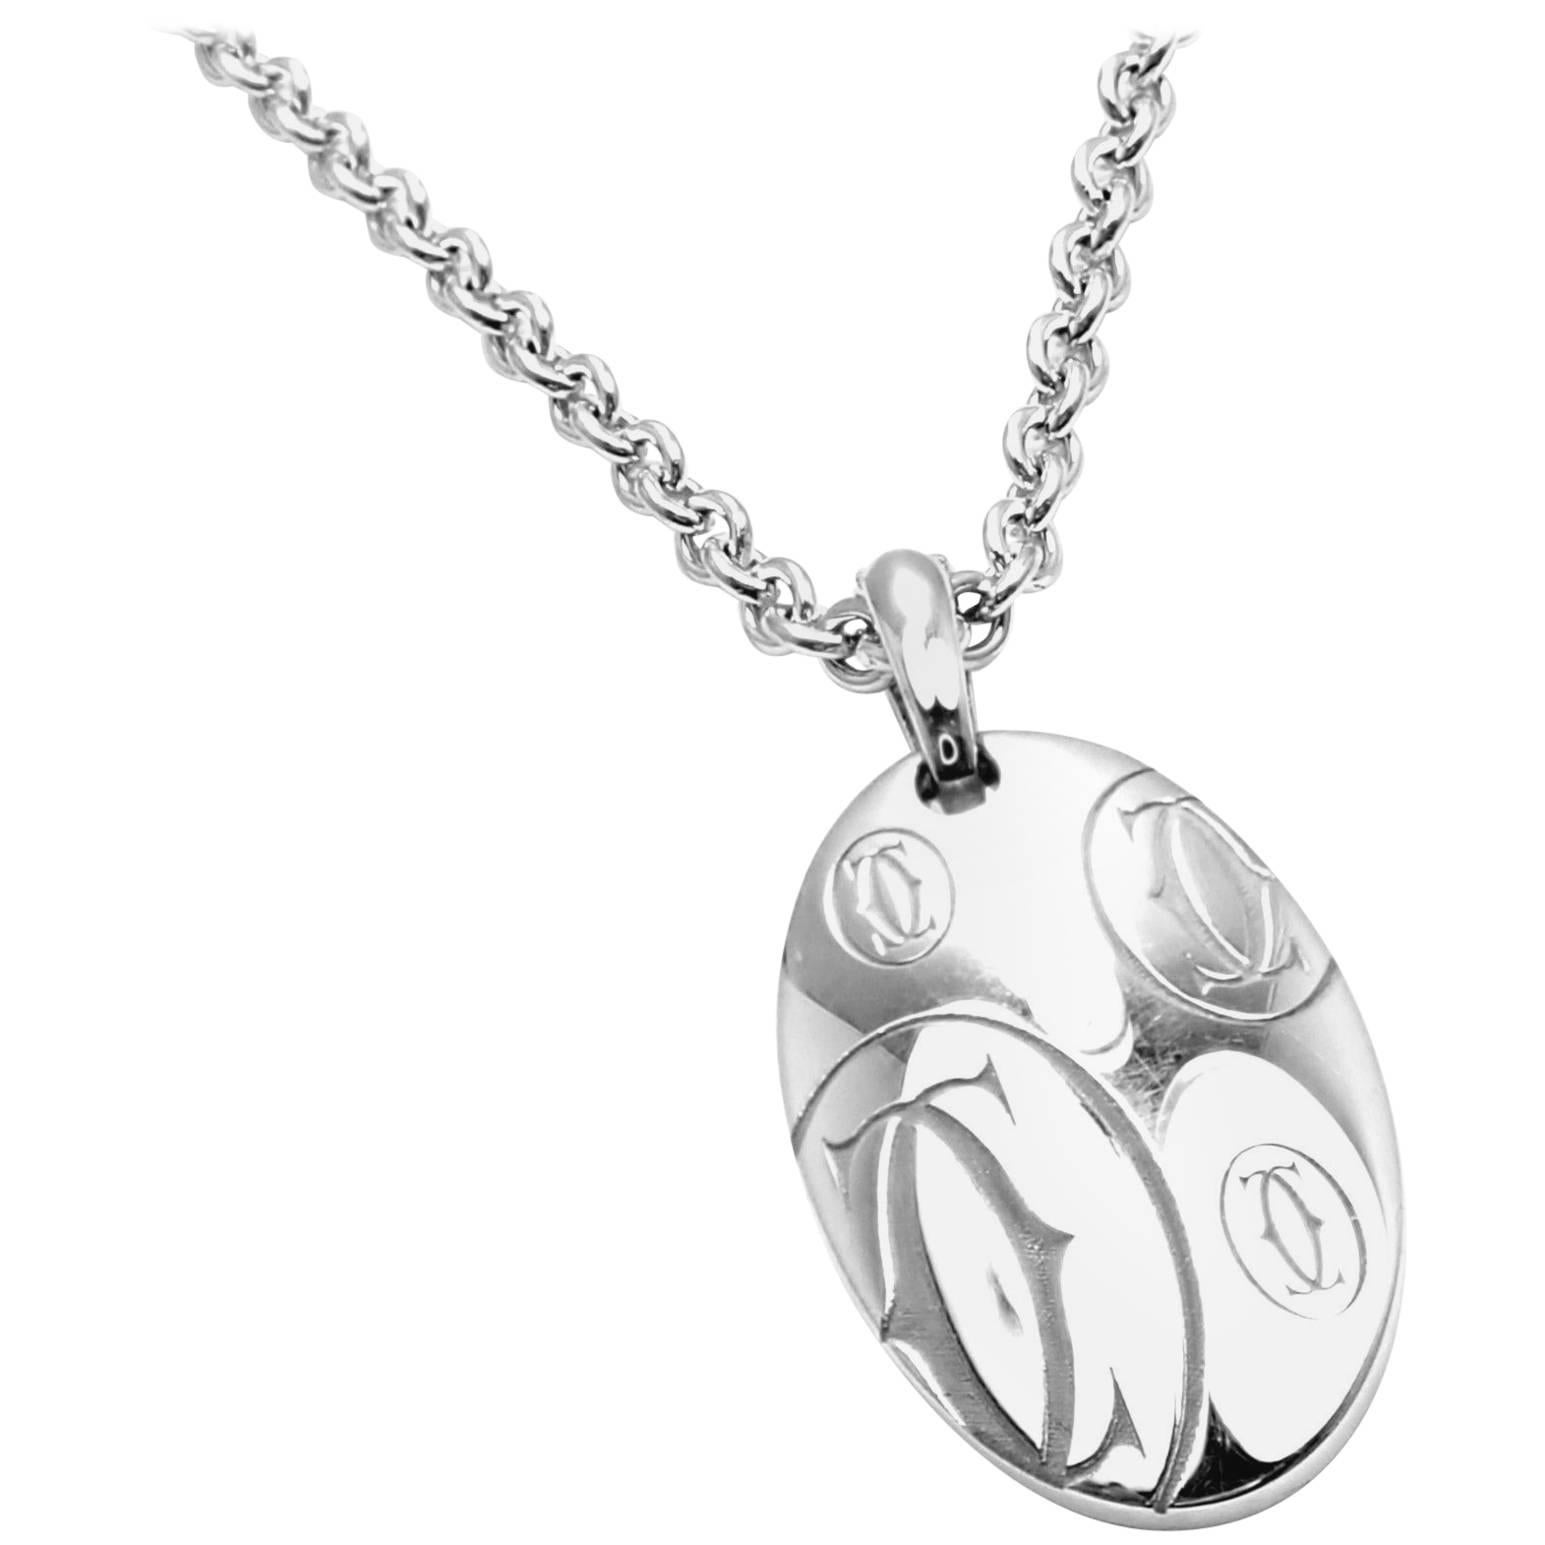 Cartier Happy Birthday Double C White Gold Charm Pendant Necklace